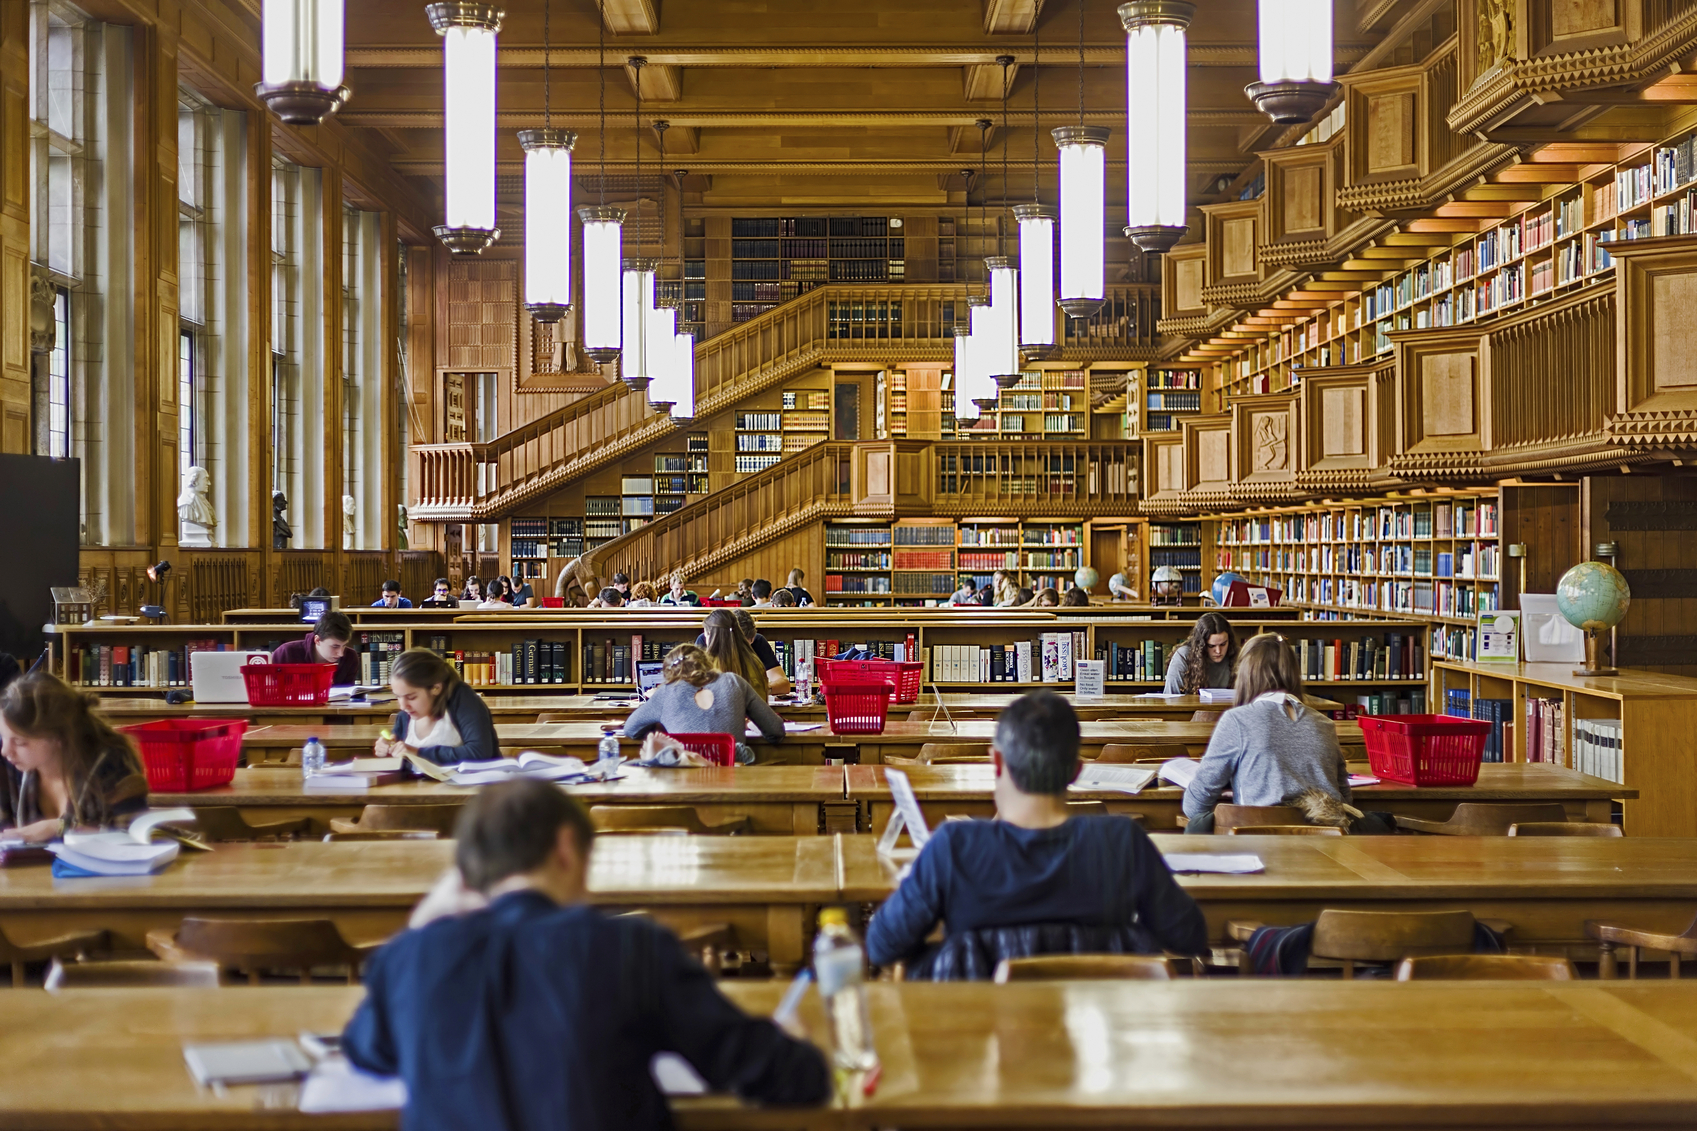 Inside the library of the university of Leuven, Belgium